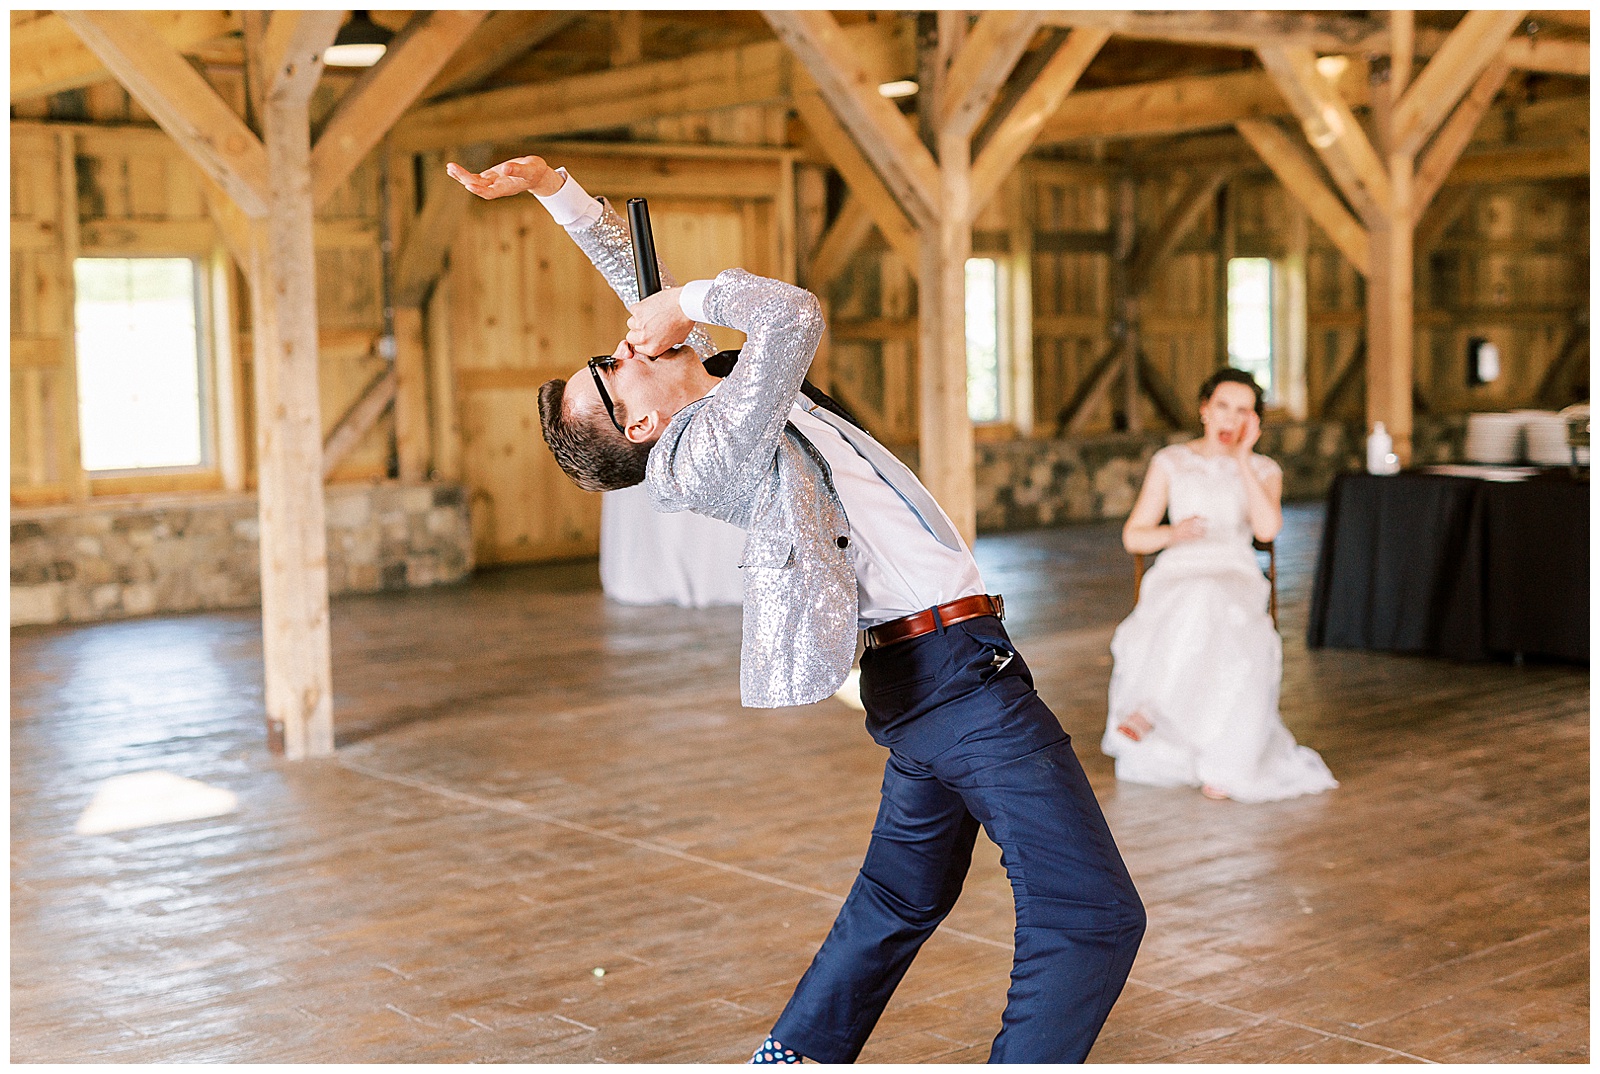 groom performs hilarious surprise song for bride in wooden open barn wedding venue